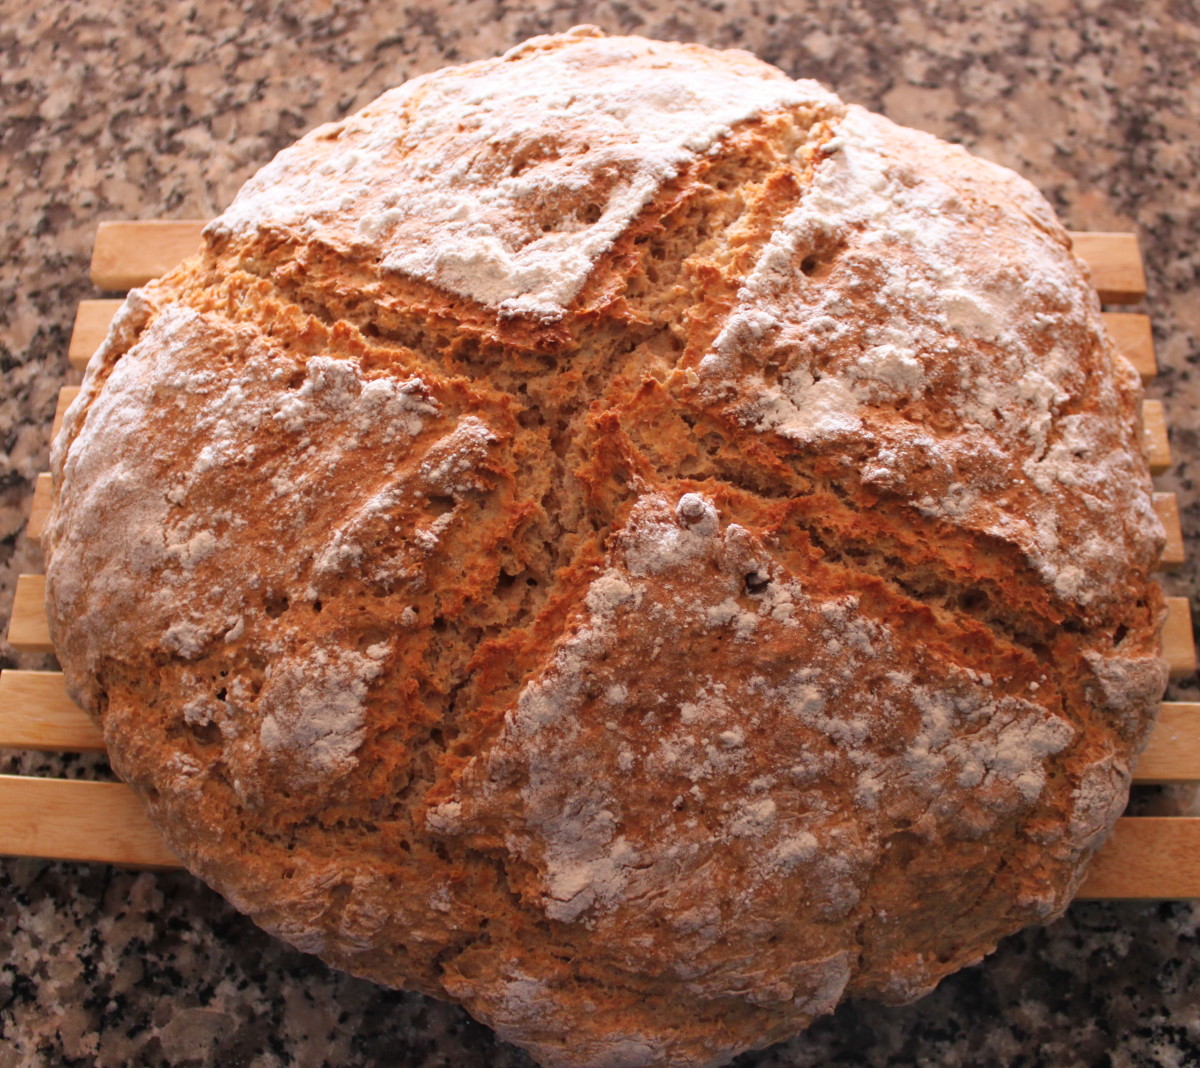 How to Make Brown Soda Bread: Step-by-Step Instructions With Pictures